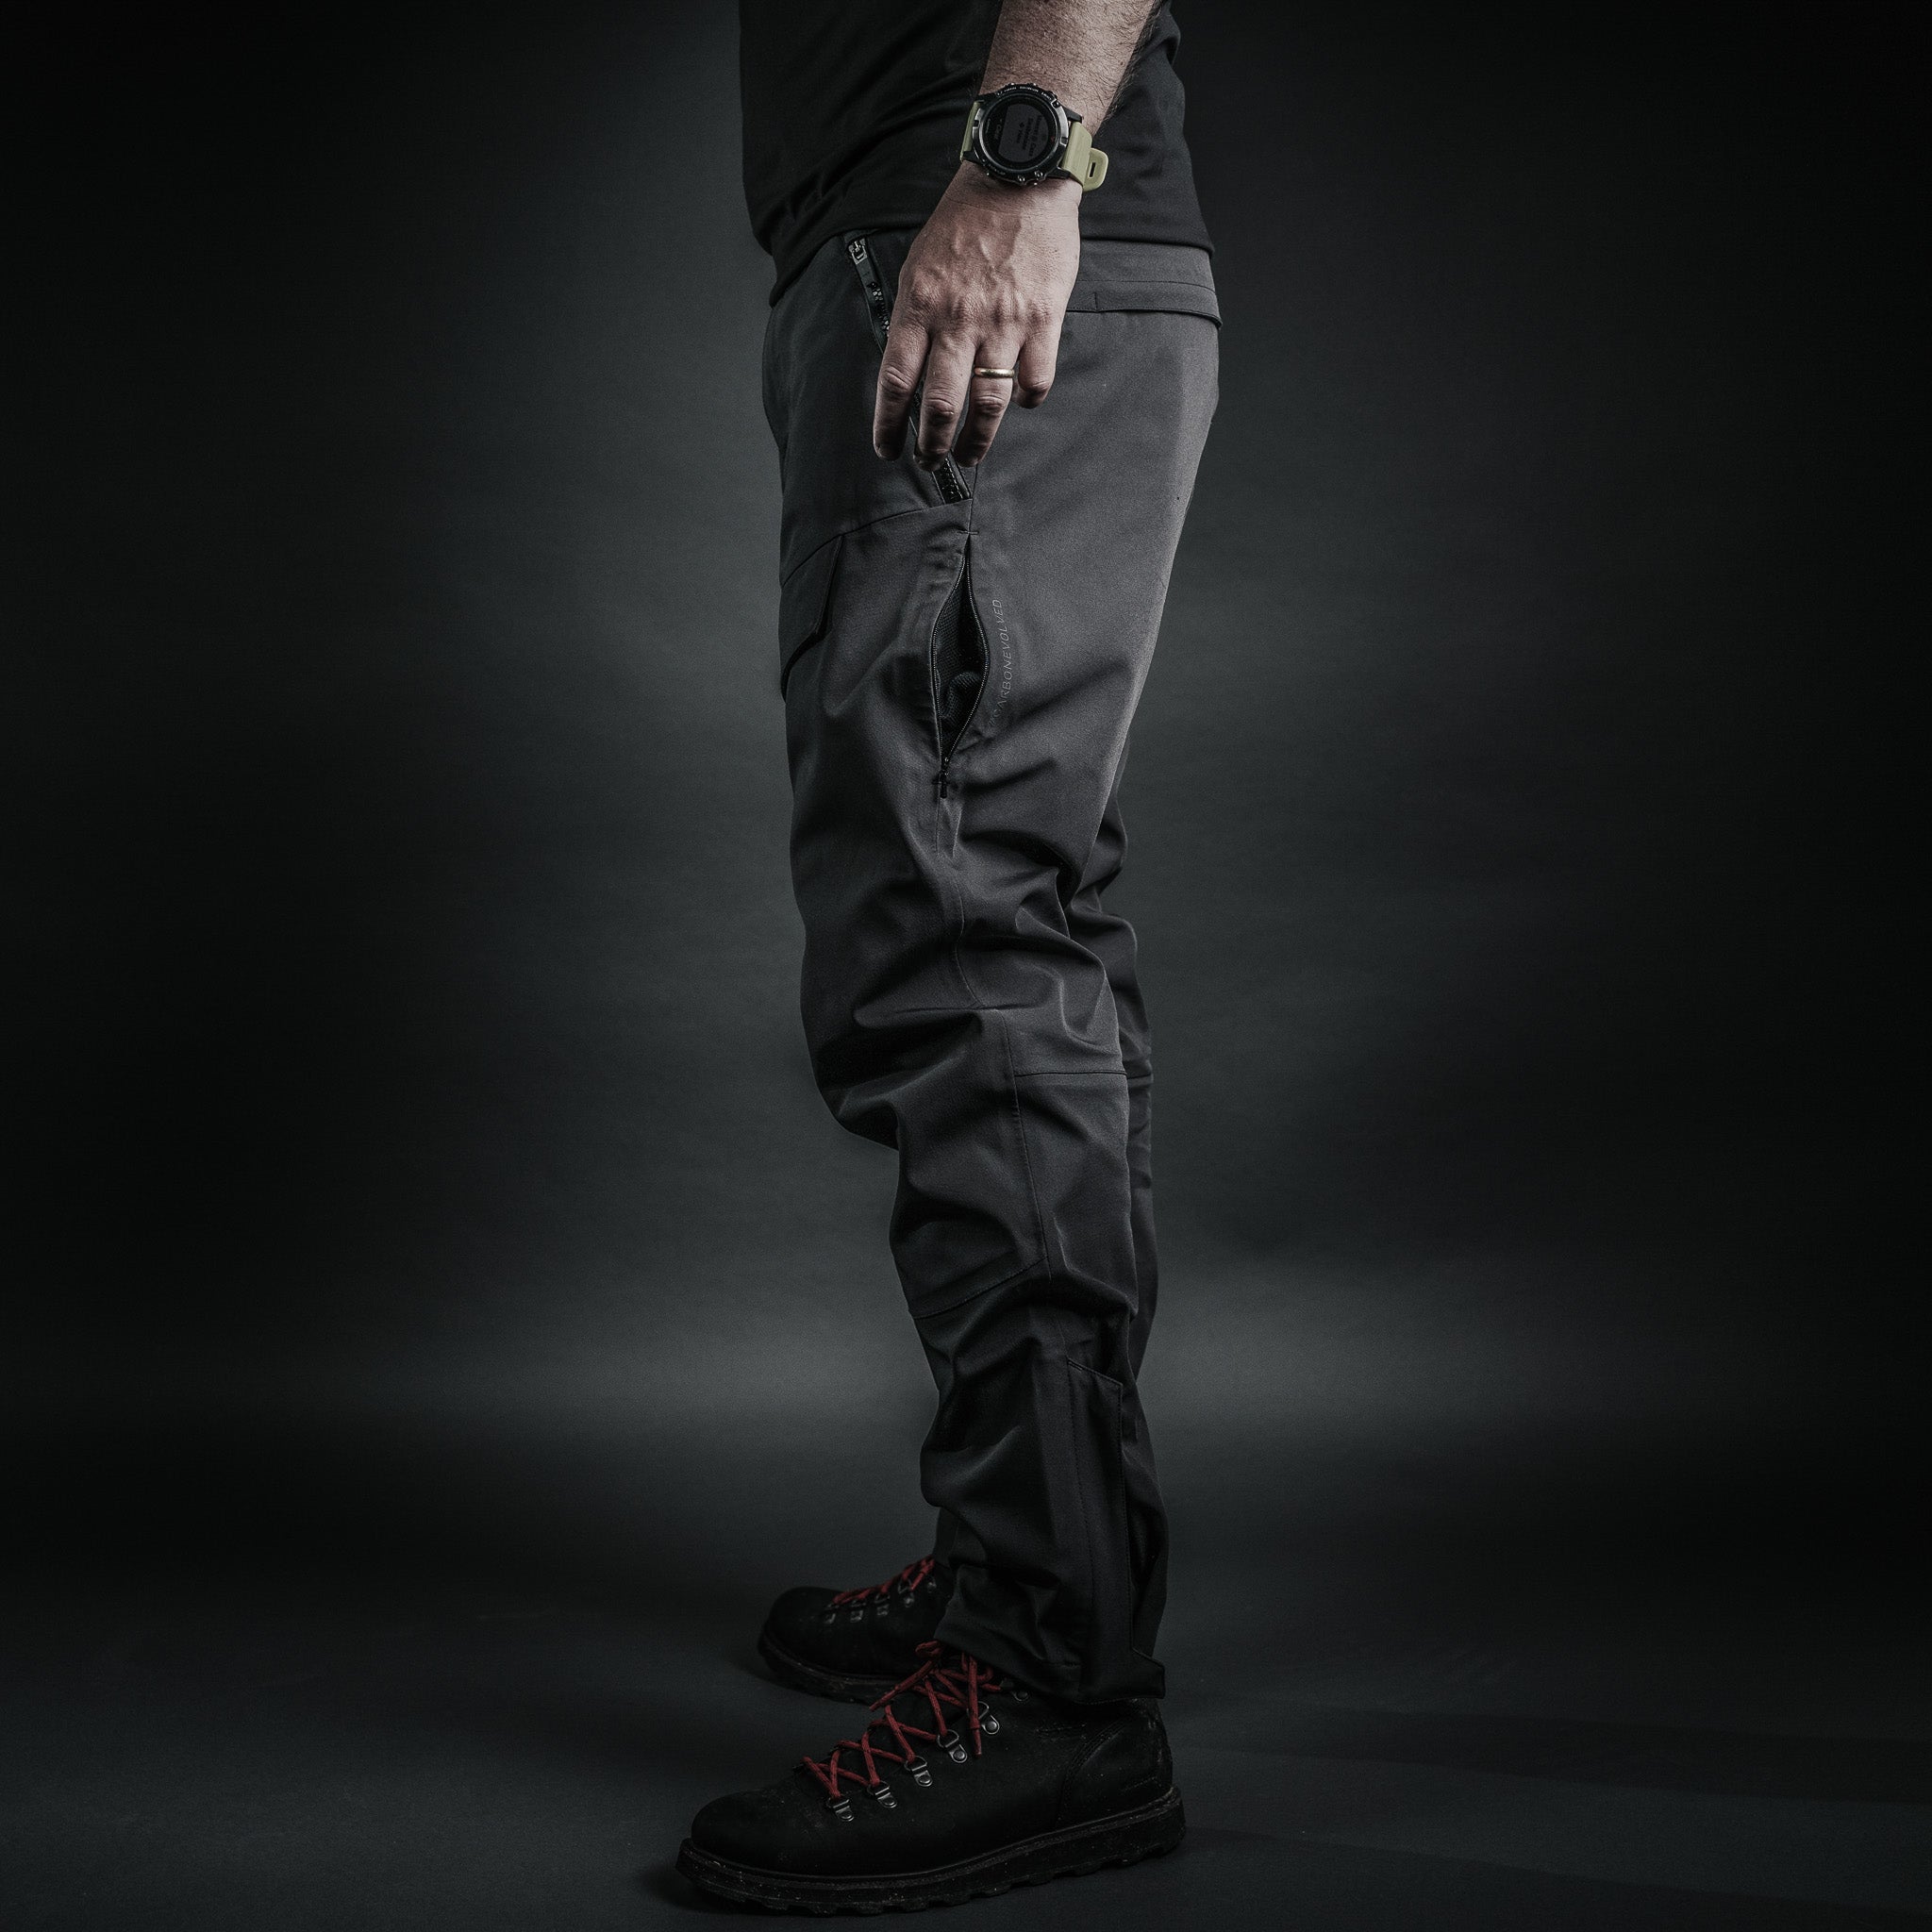 Expedition Pants / Everything Proof Series by Graphene-X - Graphene X